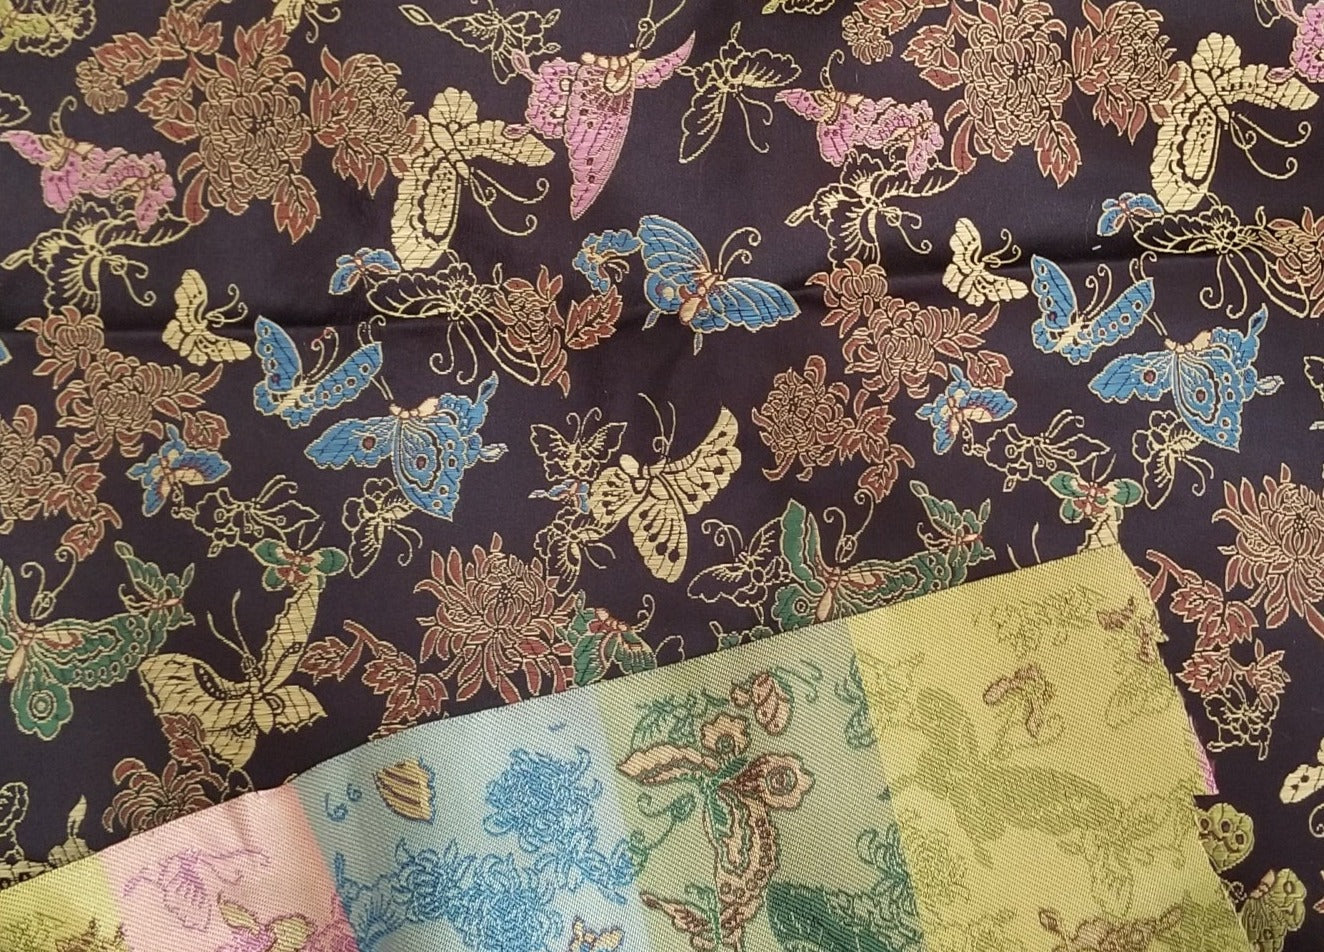 LA FInch 5 yard precut: 5 yards of Fashion Black Lucky Butterflies and Florals  Brocade Woven